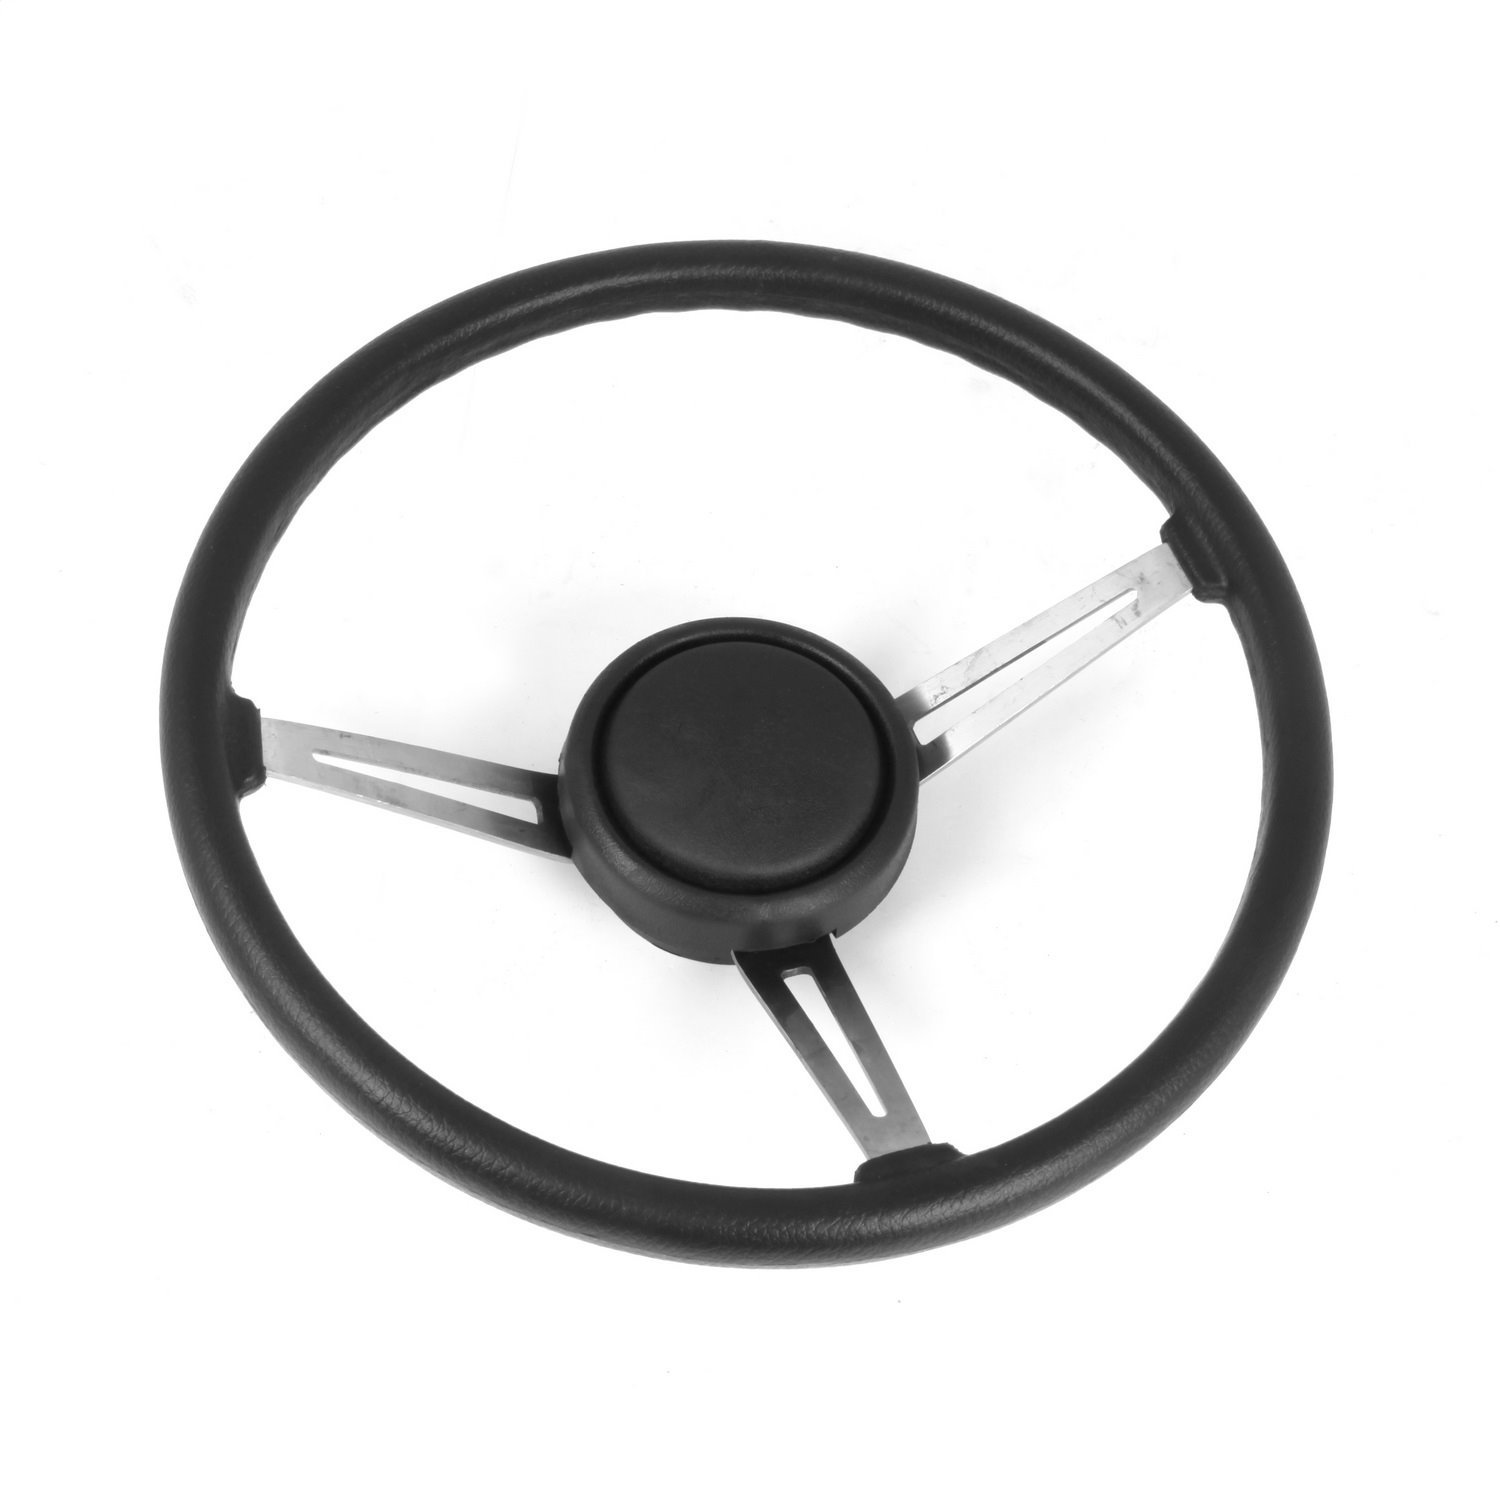 This black leather steering wheel kit from Omix-ADA